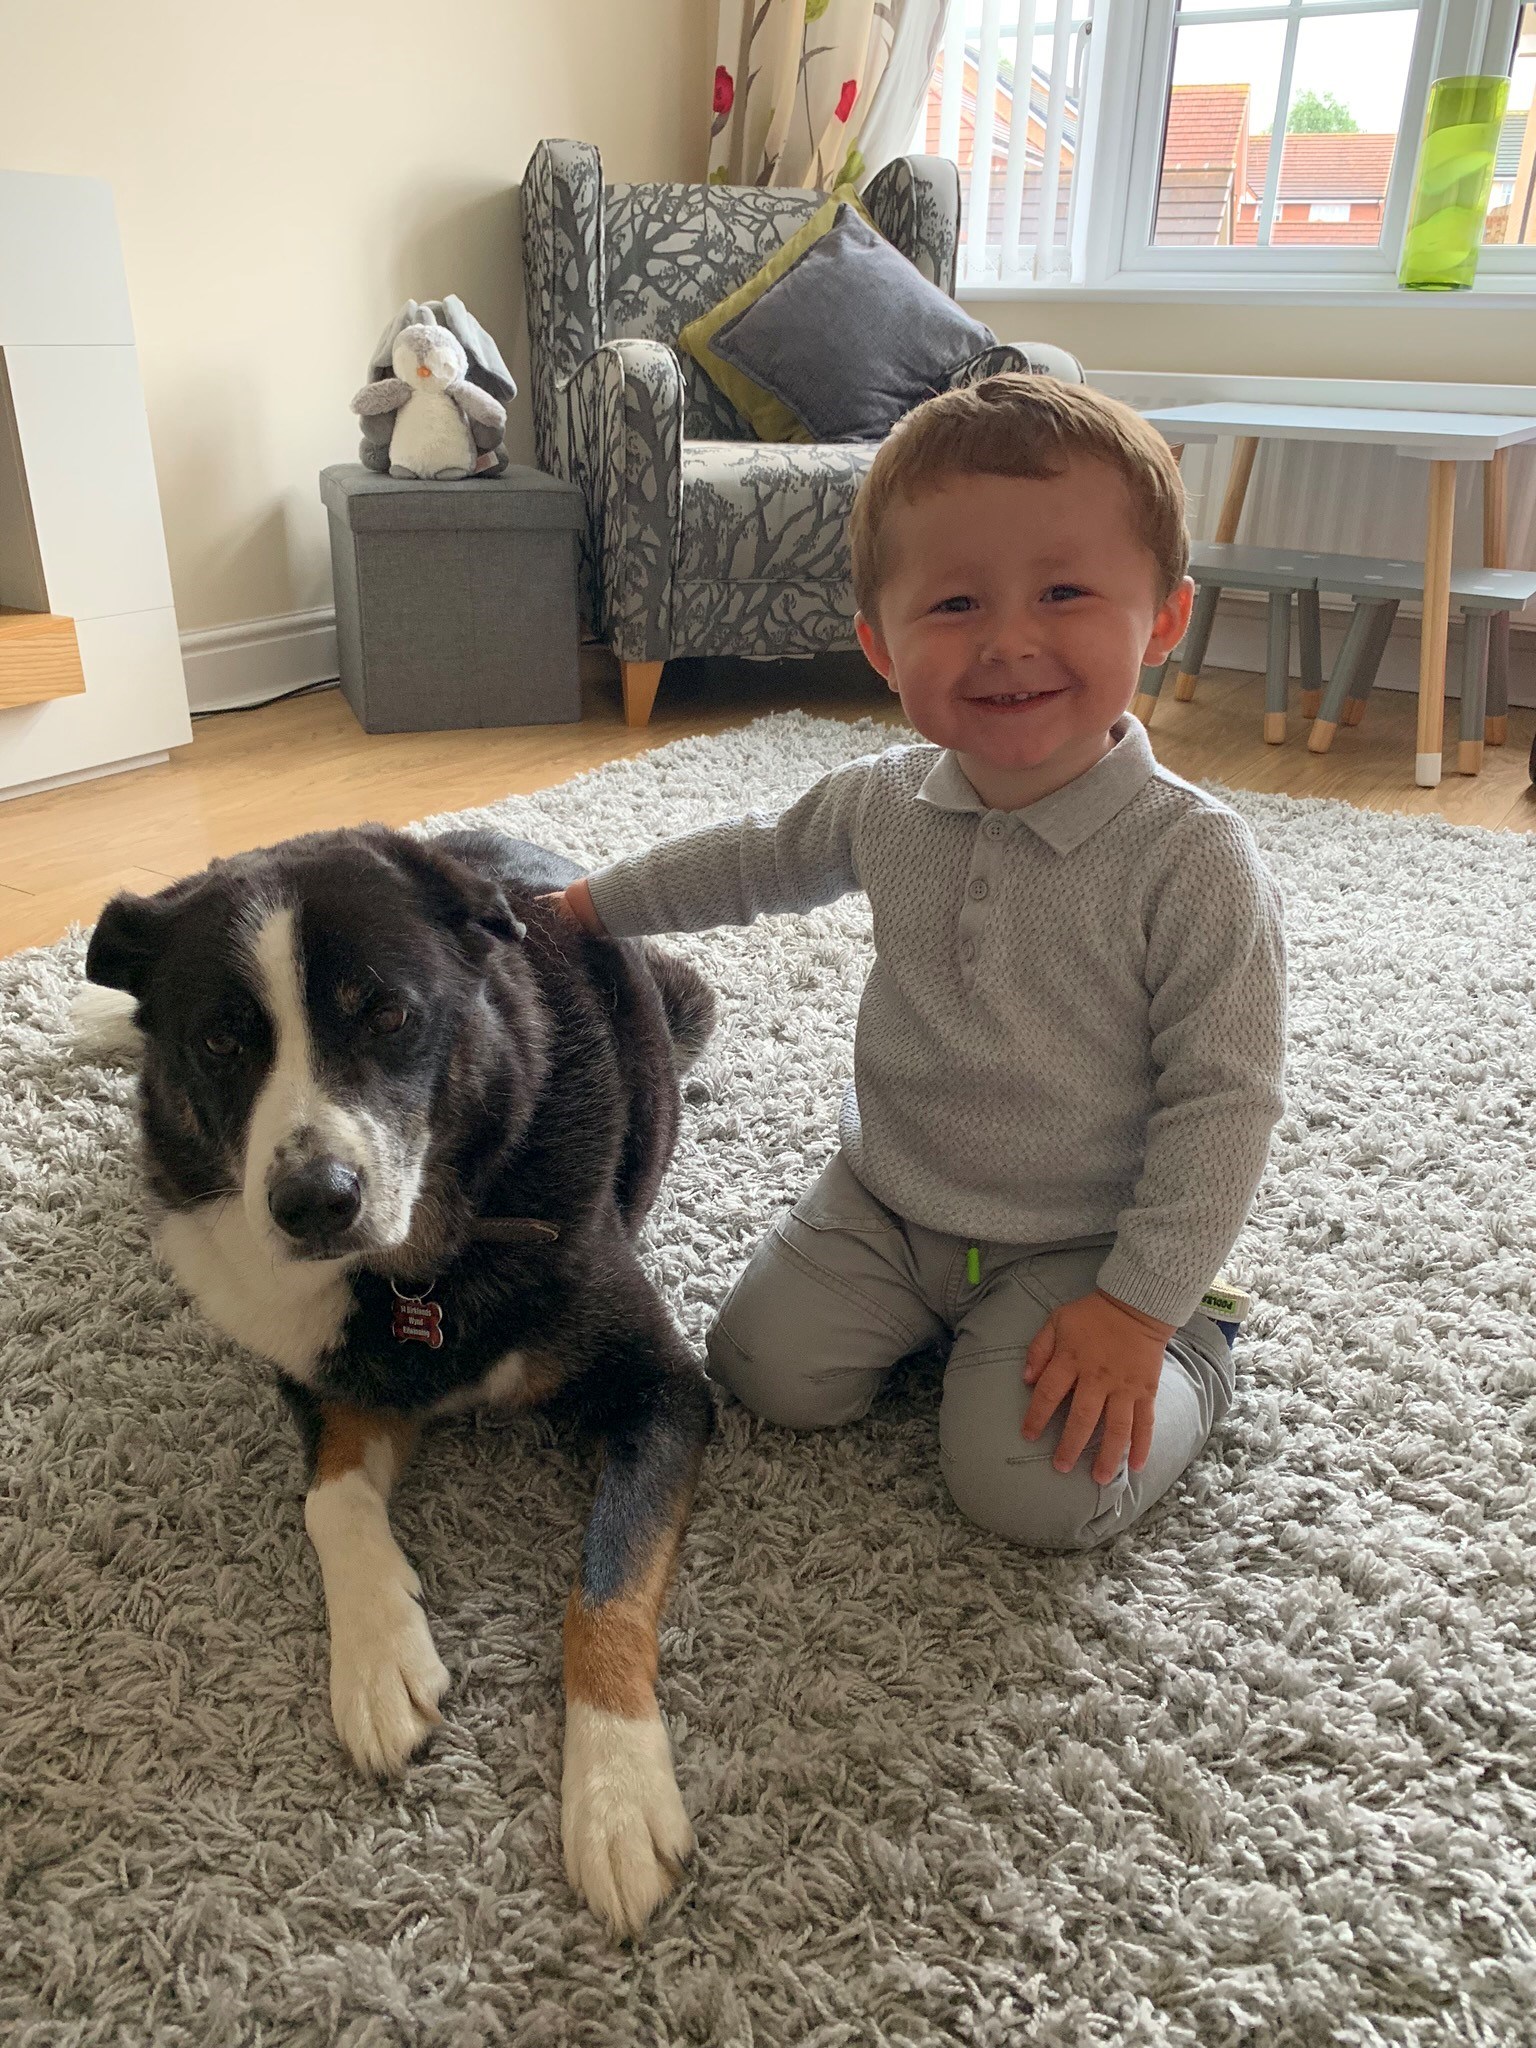 Little boy wearing grey sitting with black and white dog